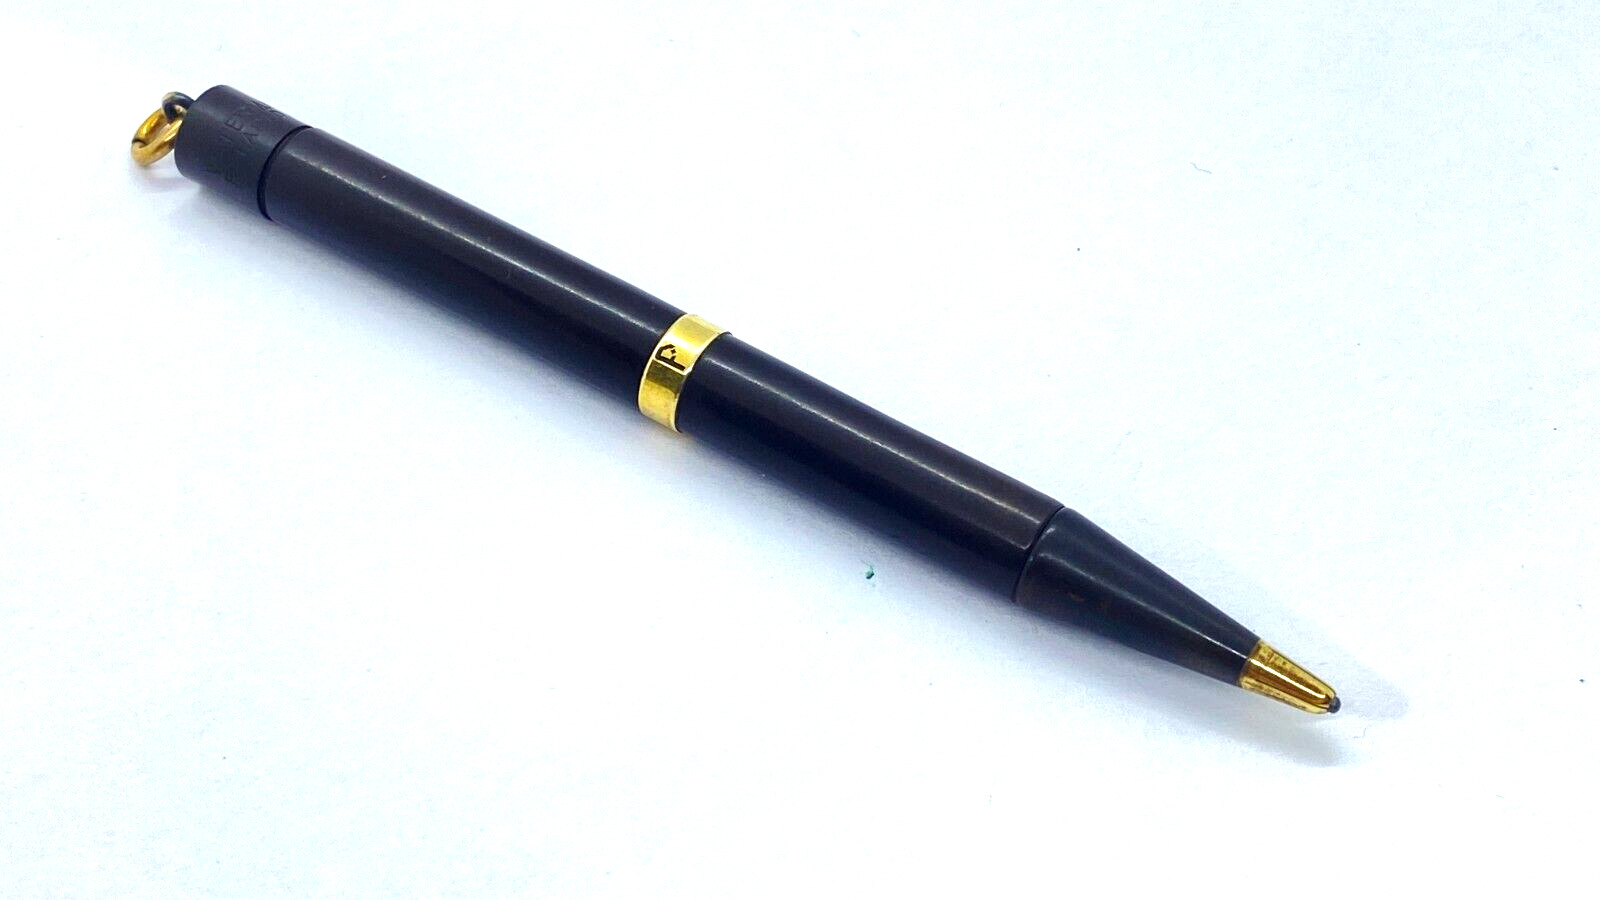 WATERMAN 52 1/2V PENCIL IN BLACK HARD RUBBER PATENT APPLIED FOR WORKS FINE